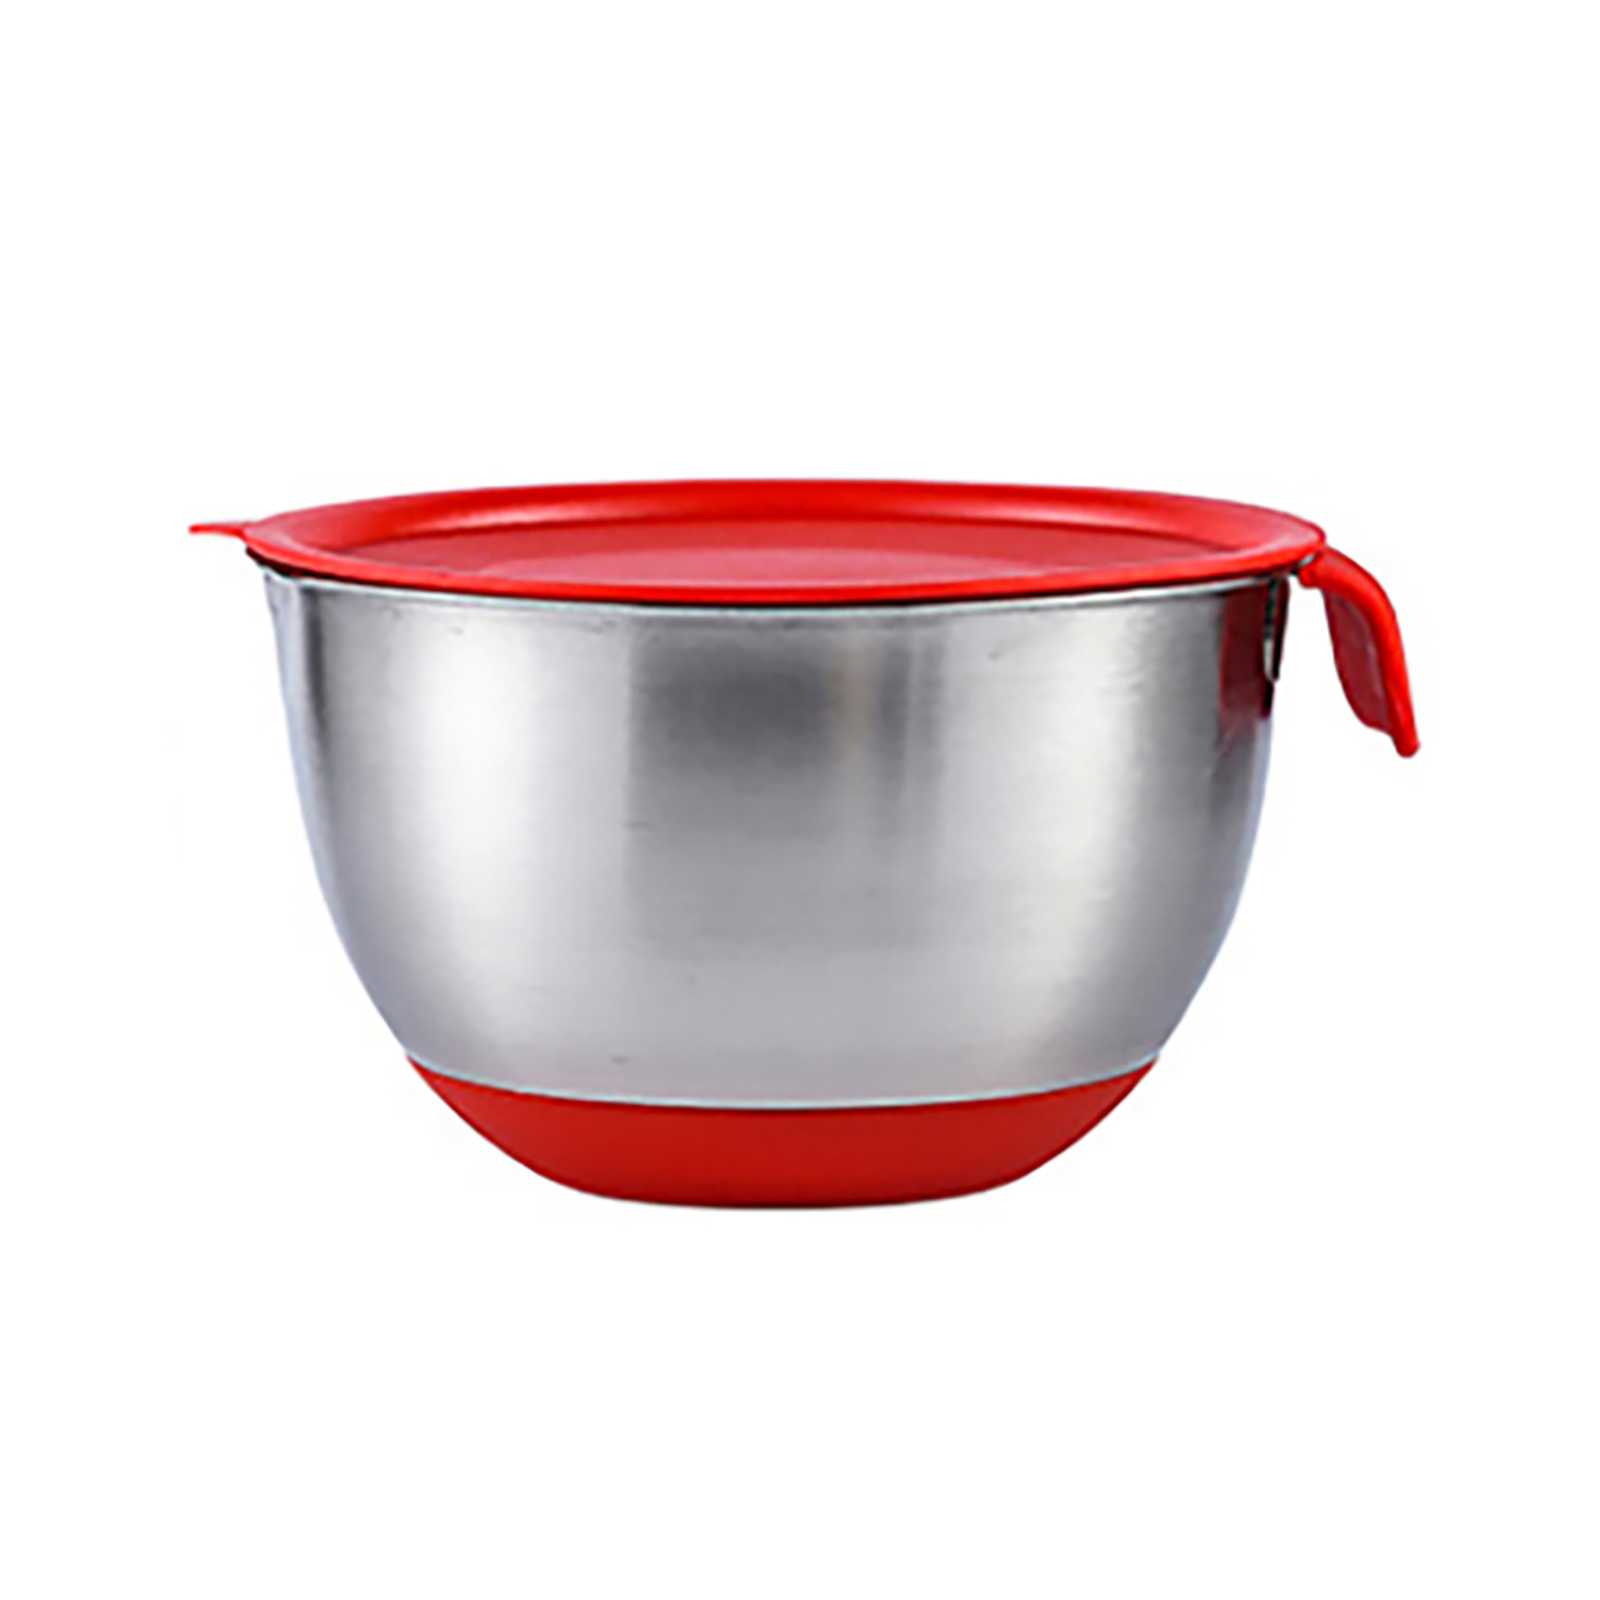 Mixing Bowls Anti-slip Silicone Bottom Stainless Steel Egg Bowl With Scales Handle Salad Bowl With Lid Baking Basin single handle bowl 22CM